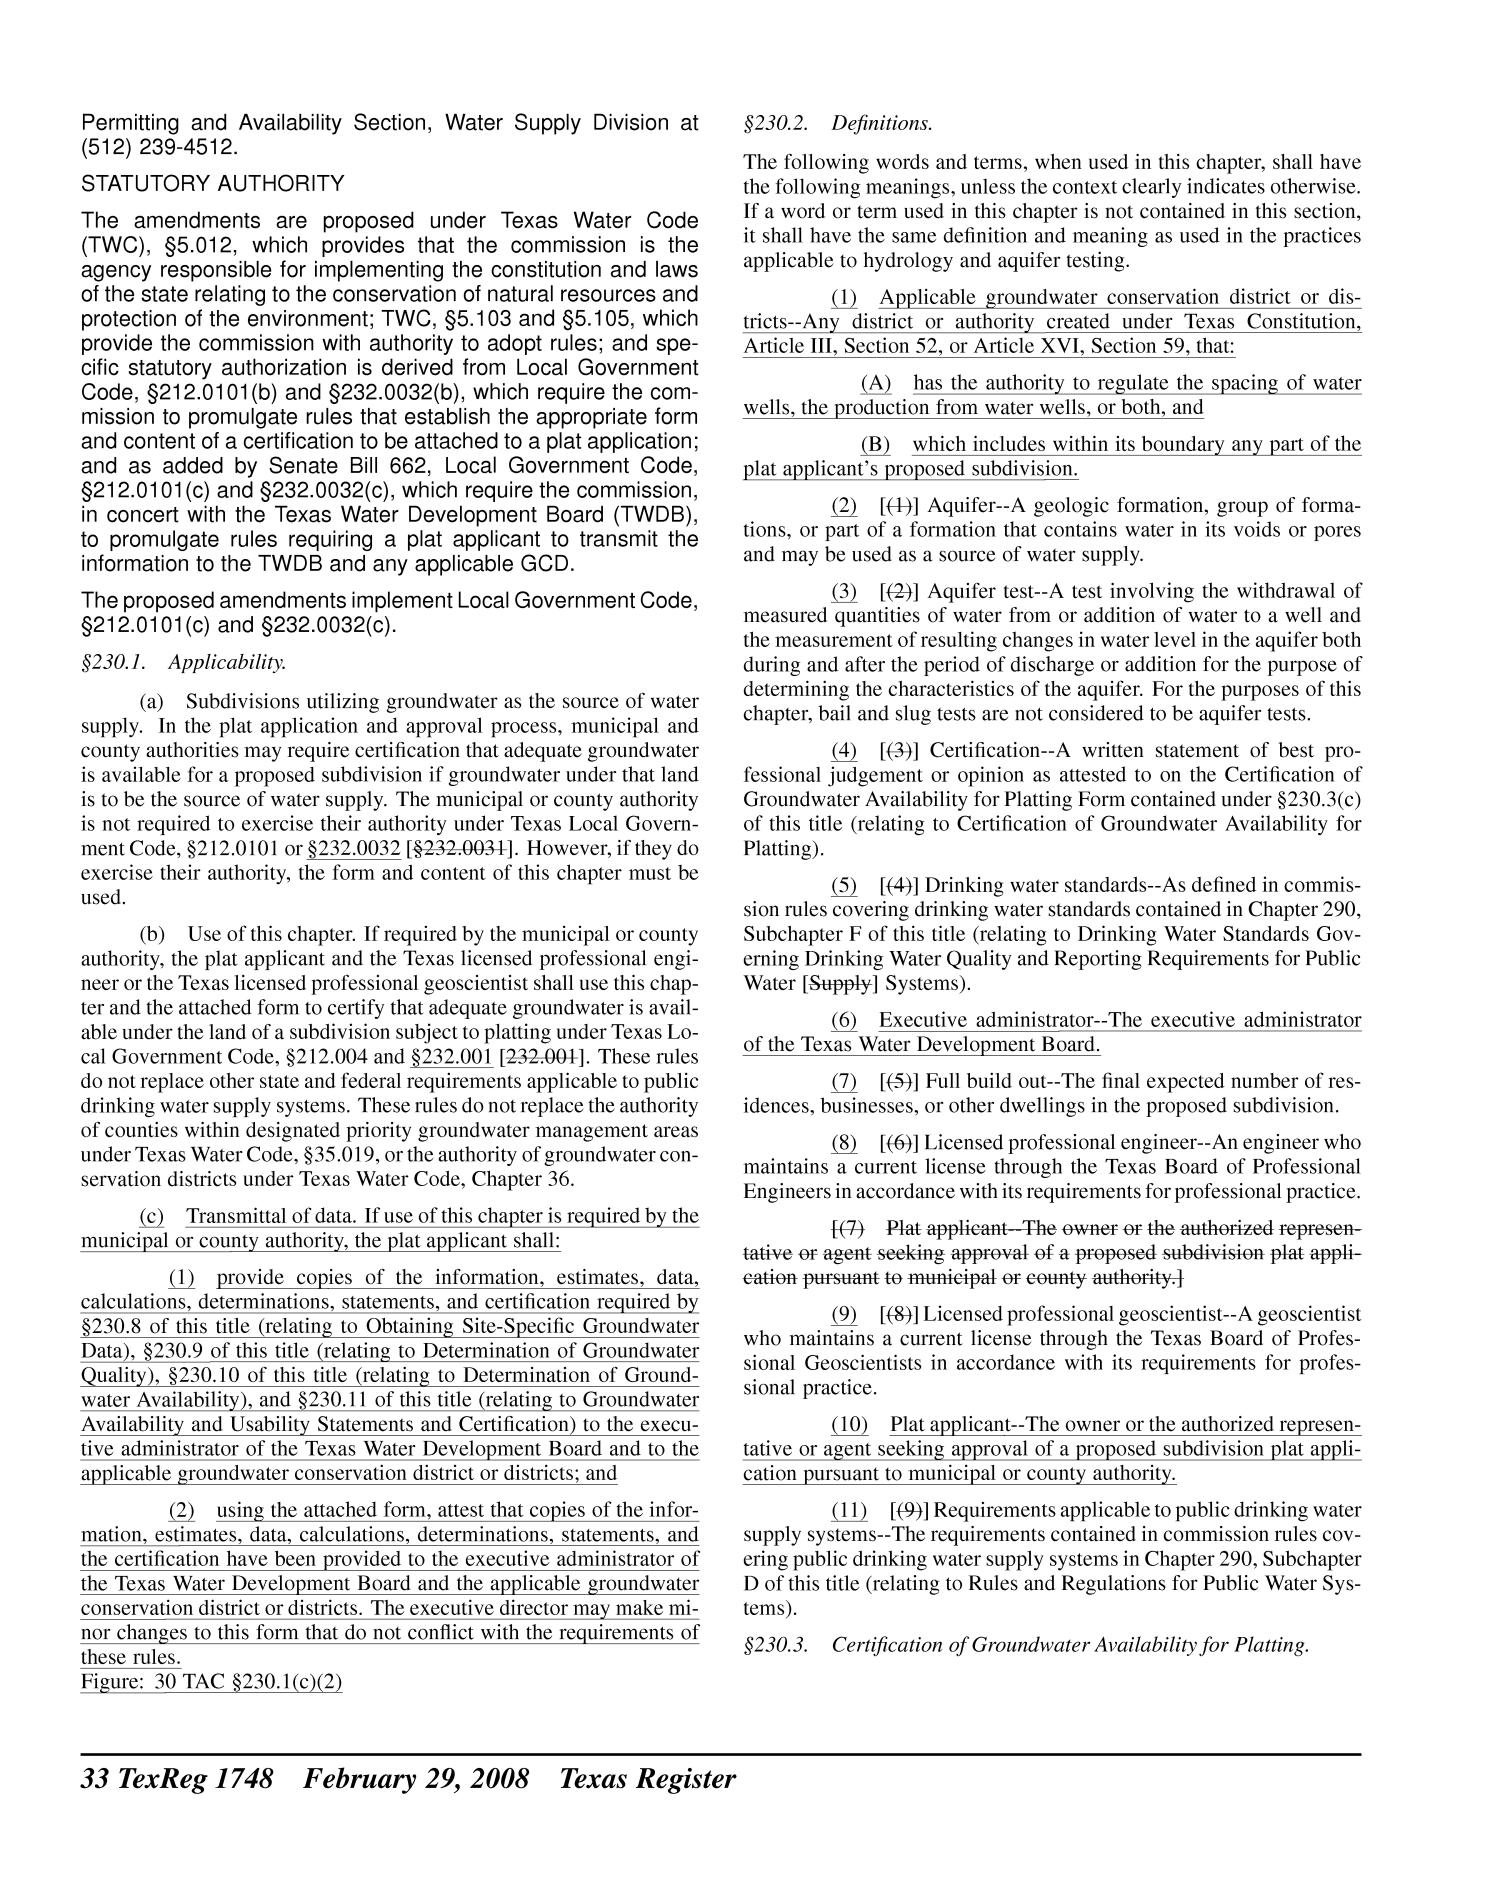 Texas Register, Volume 33, Number 9, Pages 1657-1906, February 29, 2008
                                                
                                                    1748
                                                